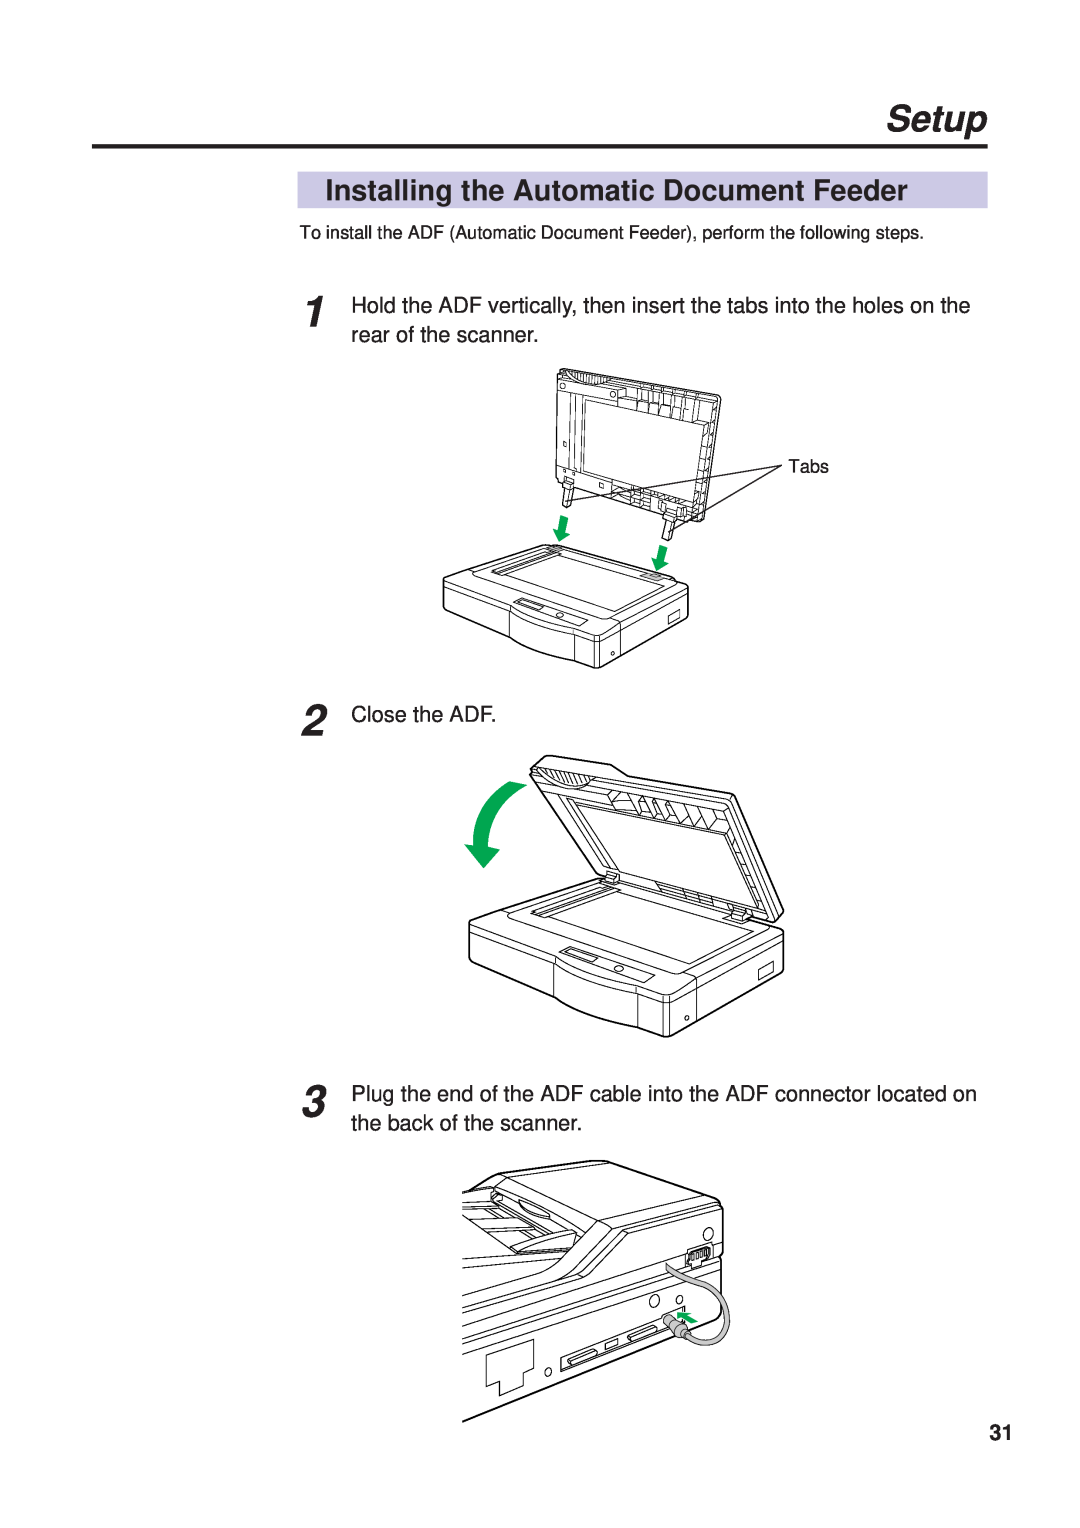 Panasonic KX-PS8000 Installing the Automatic Document Feeder, rear of the scanner, Close the ADF, the back of the scanner 